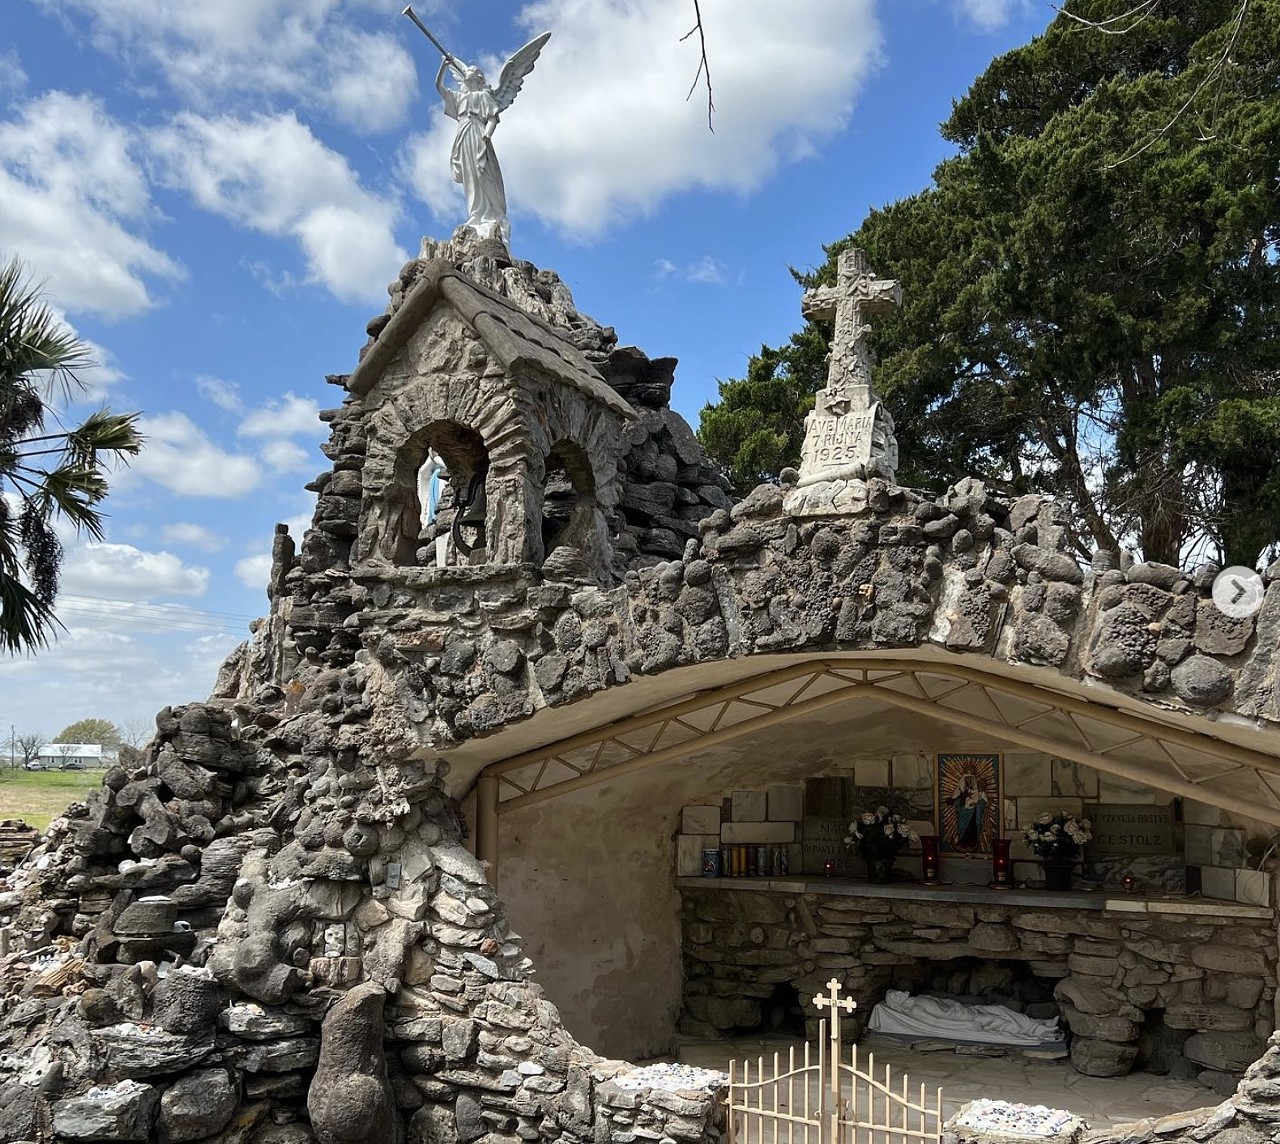 Lourdes Grotto Replica, La Grange
936 FM 2436, La Grange, roadsideamerica.com
Transport yourself to the cobbled streets of Europe at this Texas version of the grotto at Lourdes, France.
Photo via Instagram / georcuzzi